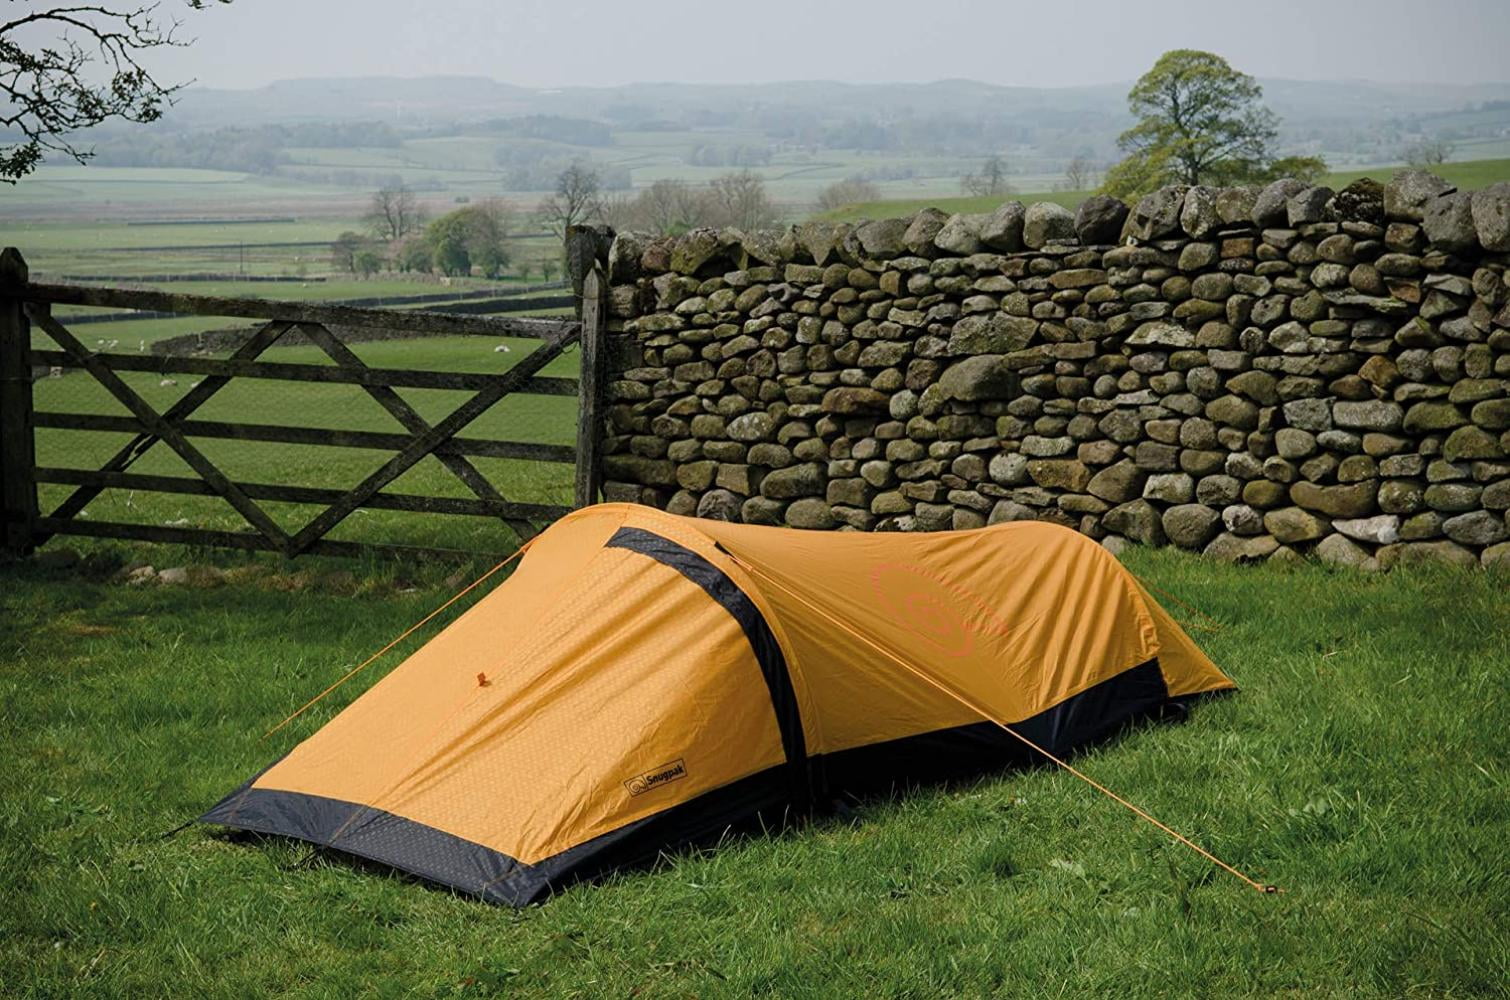 Snugpak Journey Solo 1 Person Bivvi Tent, Waterproof, Lightweight, Sunburst  Orange, Inner dimensions are 94 inches long, 35 inches wide, and 26 